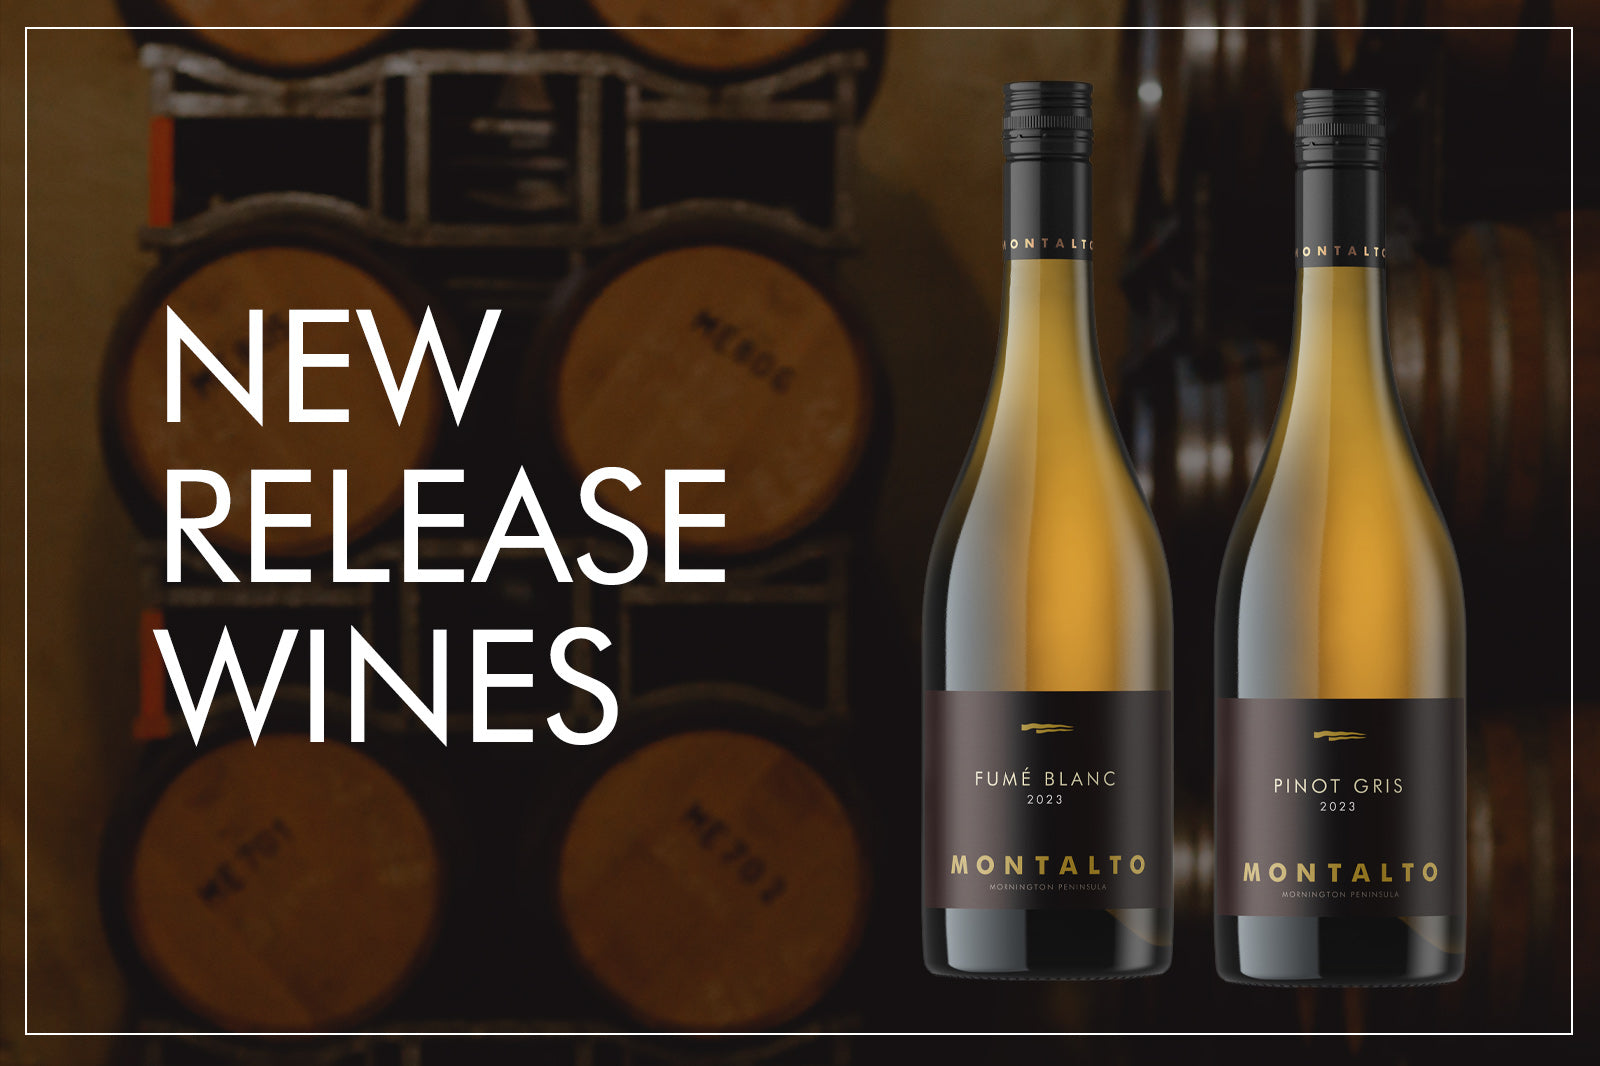 NEW RELEASE WINES: FUMÉ BLANC & PINOT GRIS